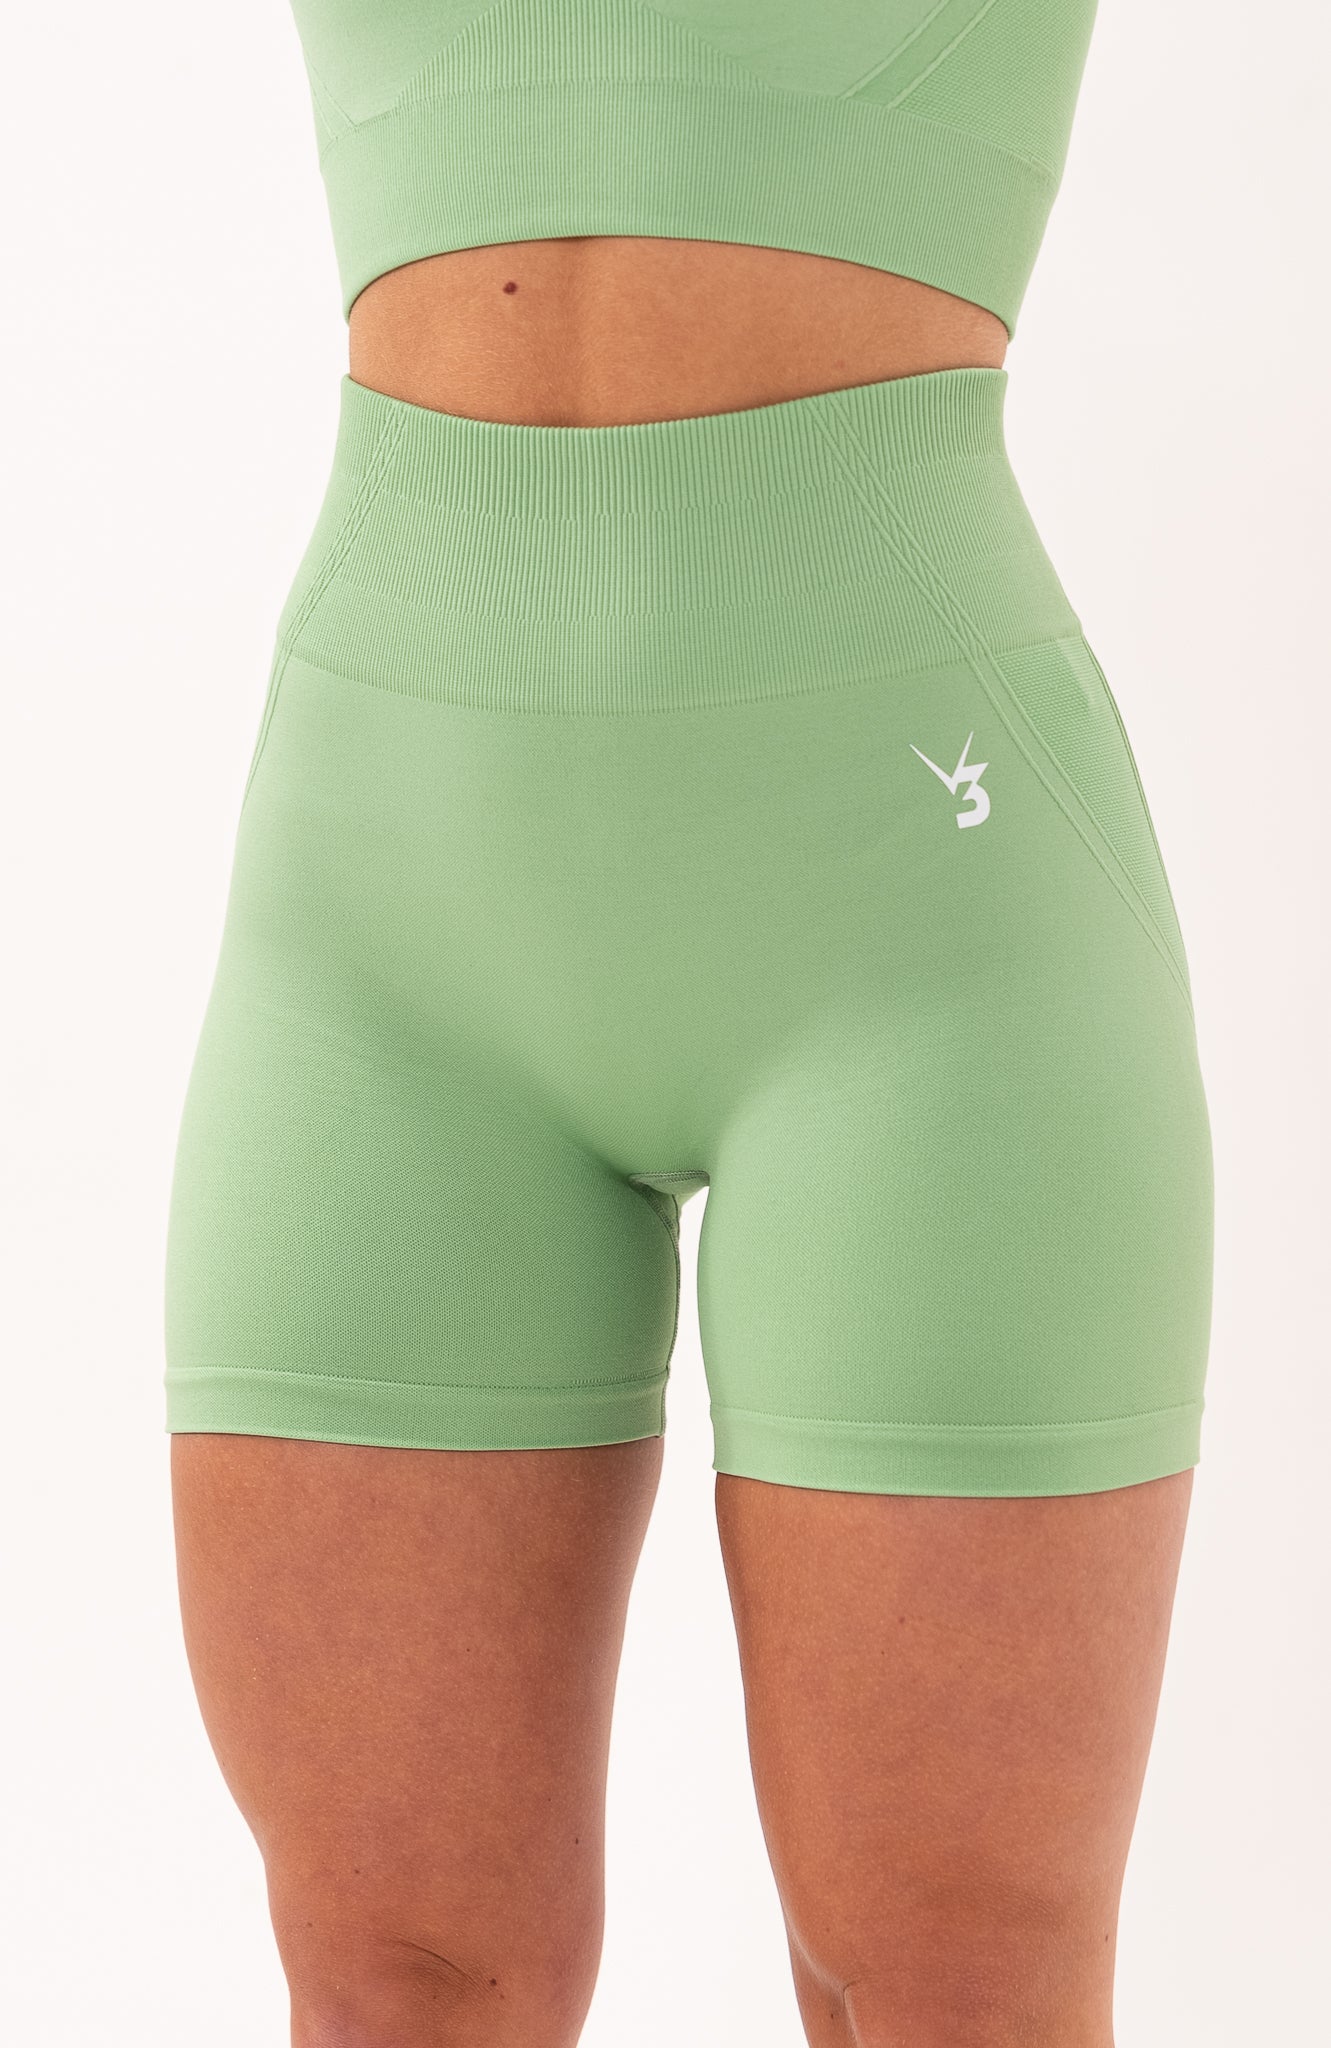 V3 Apparel Women's Tempo seamless scrunch bum shaping high waisted cycle shorts in mint green – Squat proof 5 inch leg gym shorts for workouts training, Running, yoga, bodybuilding and bikini fitness.